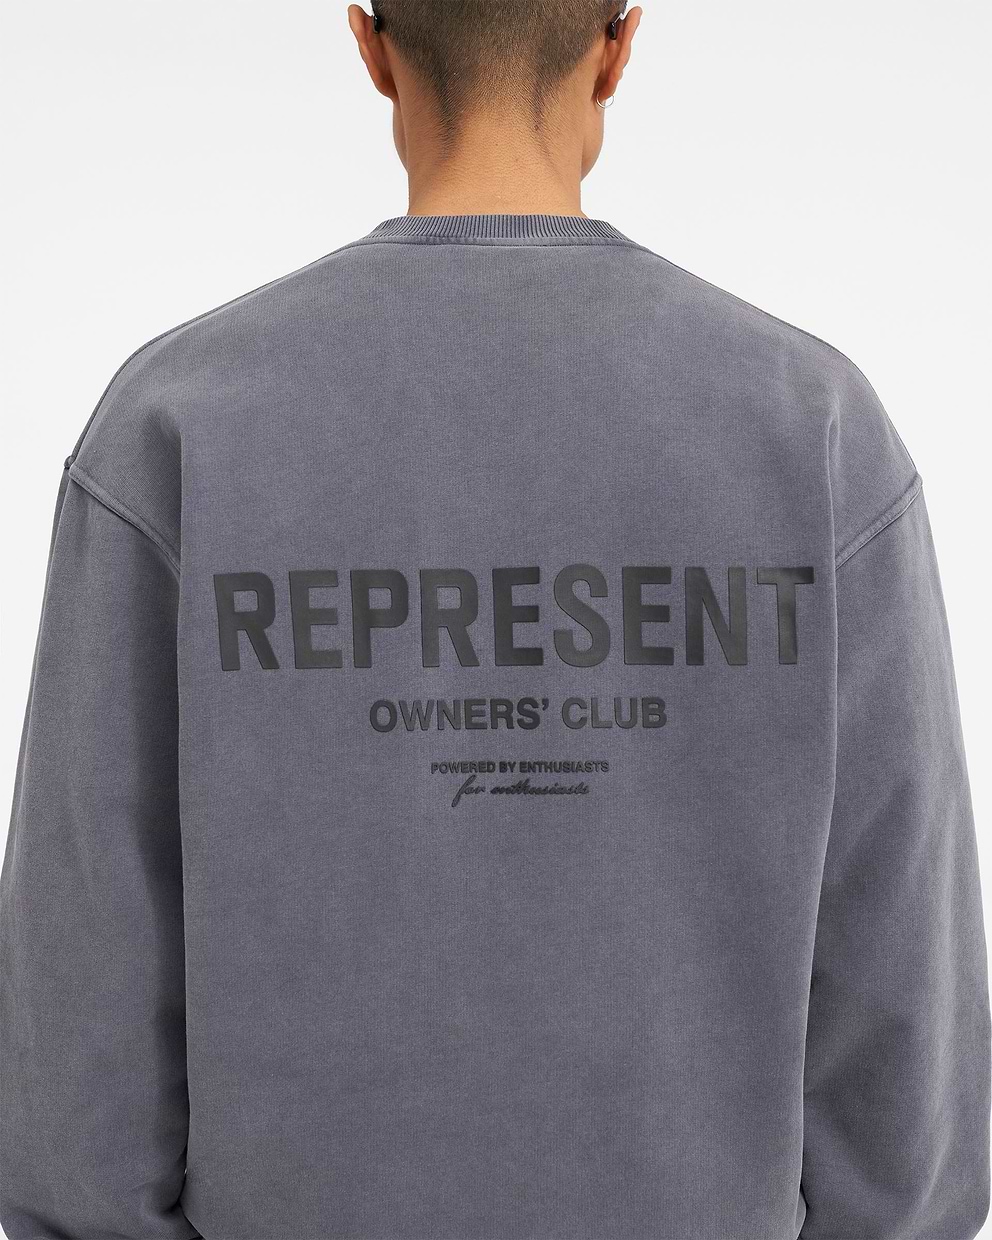 Represent Owners Club Sweater - Storm